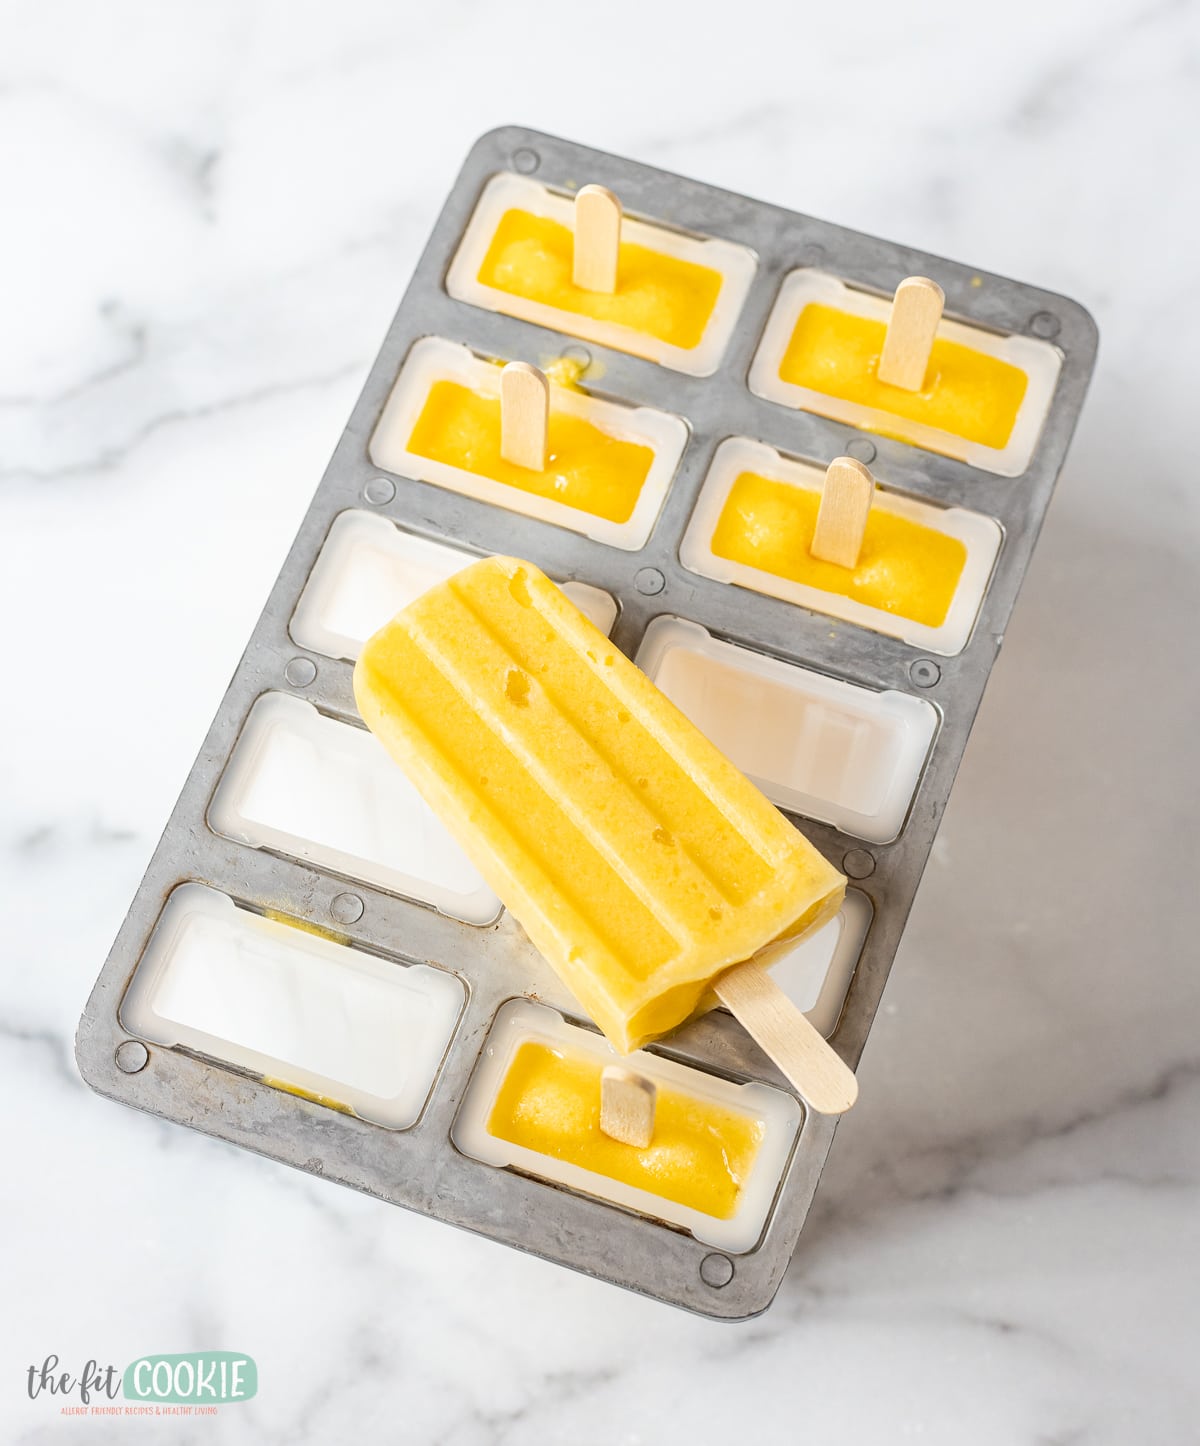 photo of mango popsicle on a metal and plastic popsicle mold.